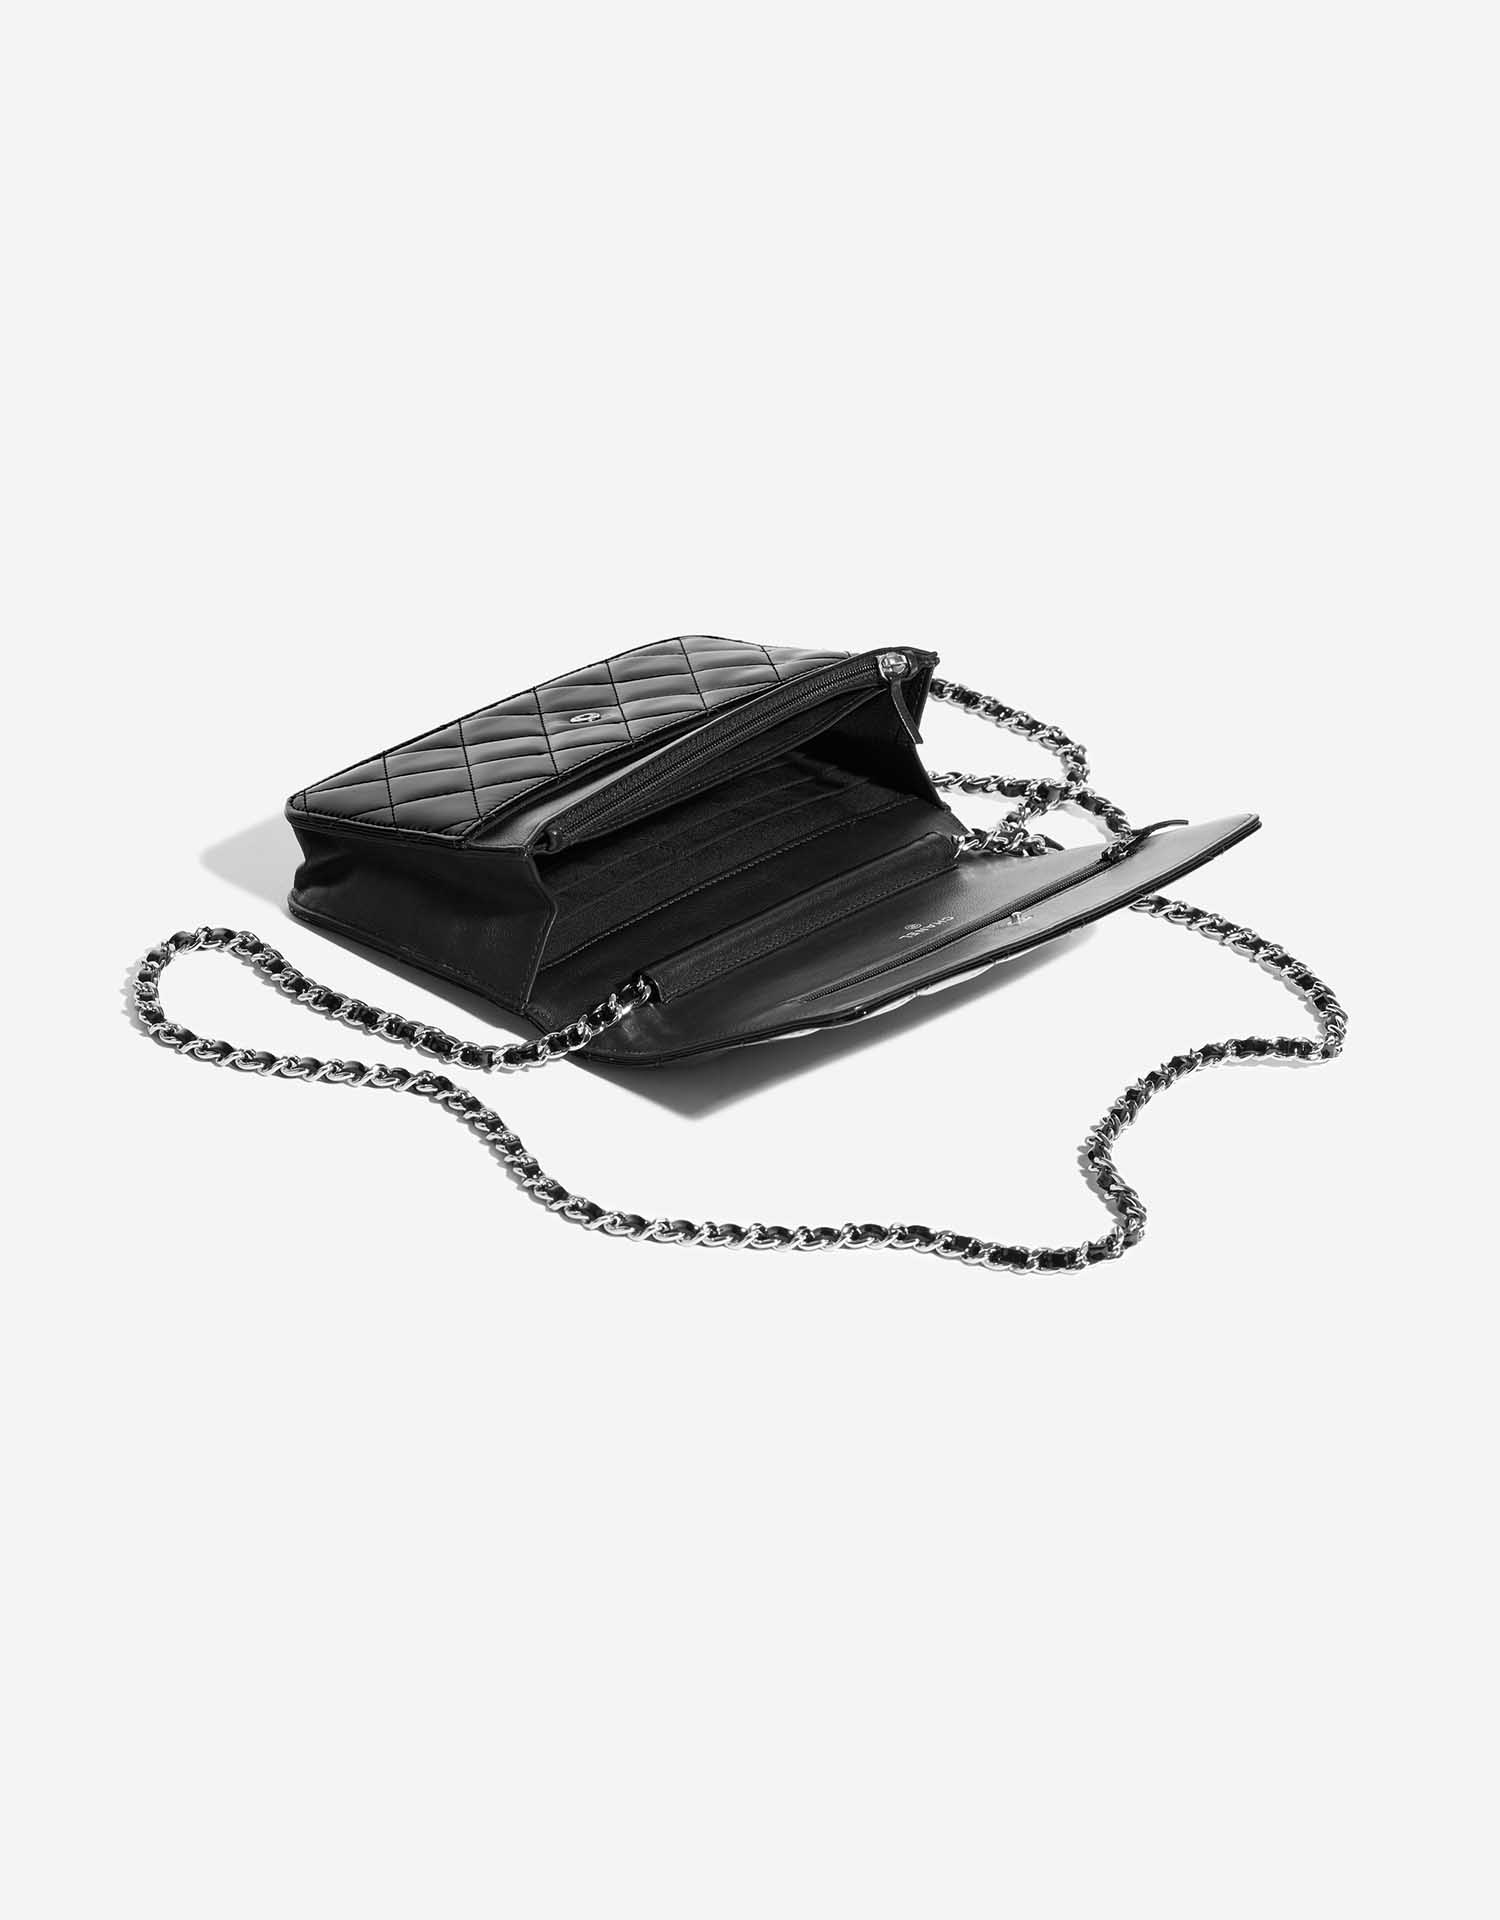 Pre-owned Chanel bag Timeless WOC Patent Leather Black Black Inside | Sell your designer bag on Saclab.com